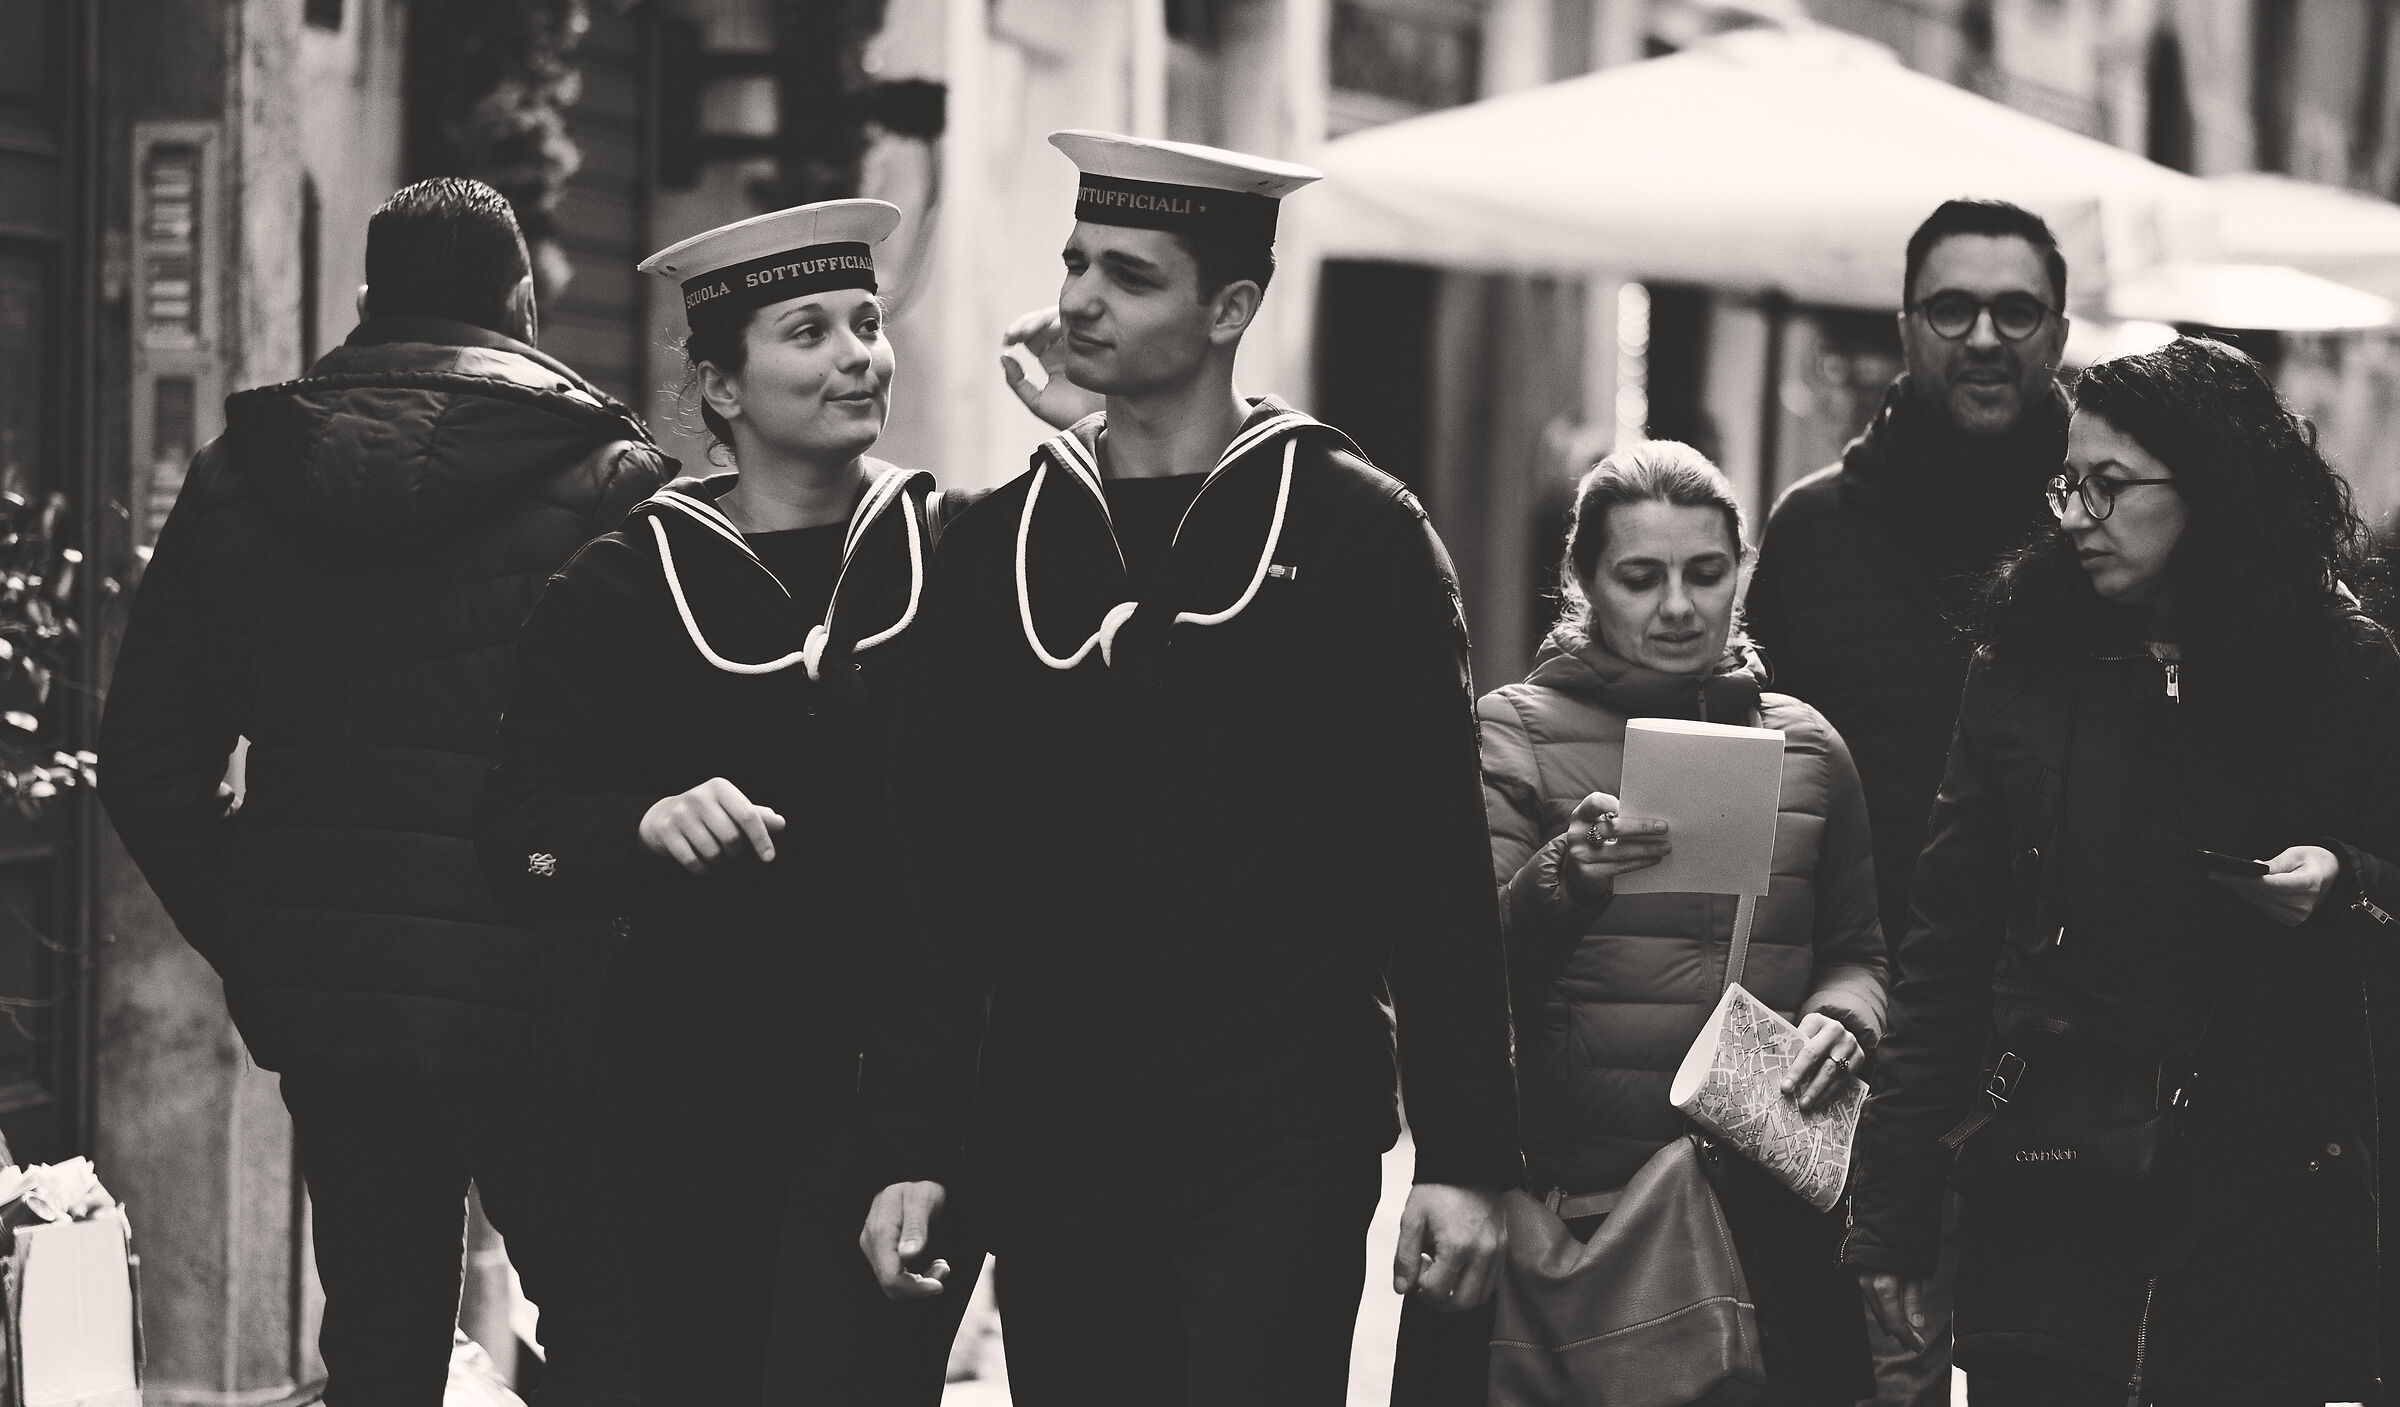 The sailors in love...